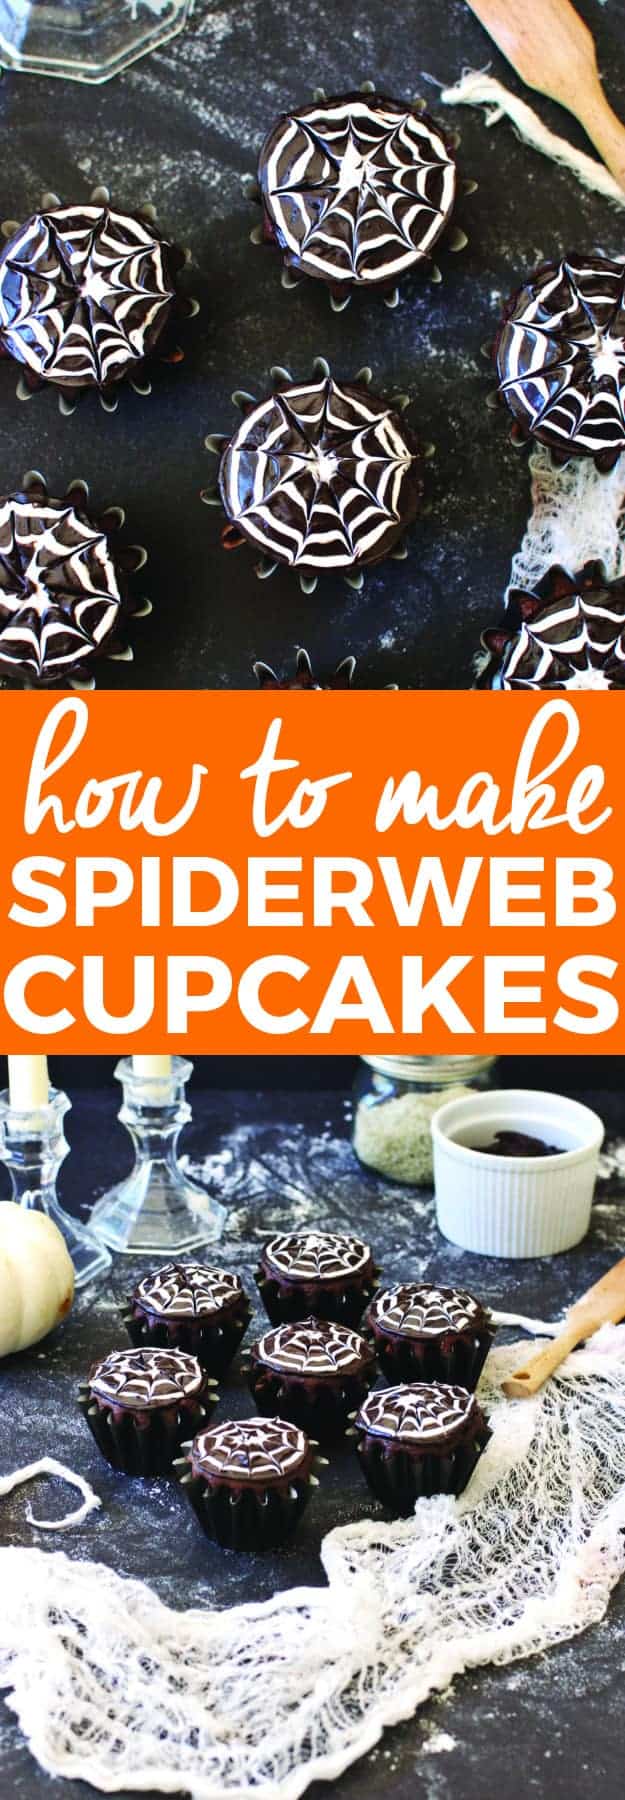 How to Make Spiderweb Cupcakes | The Butter Half